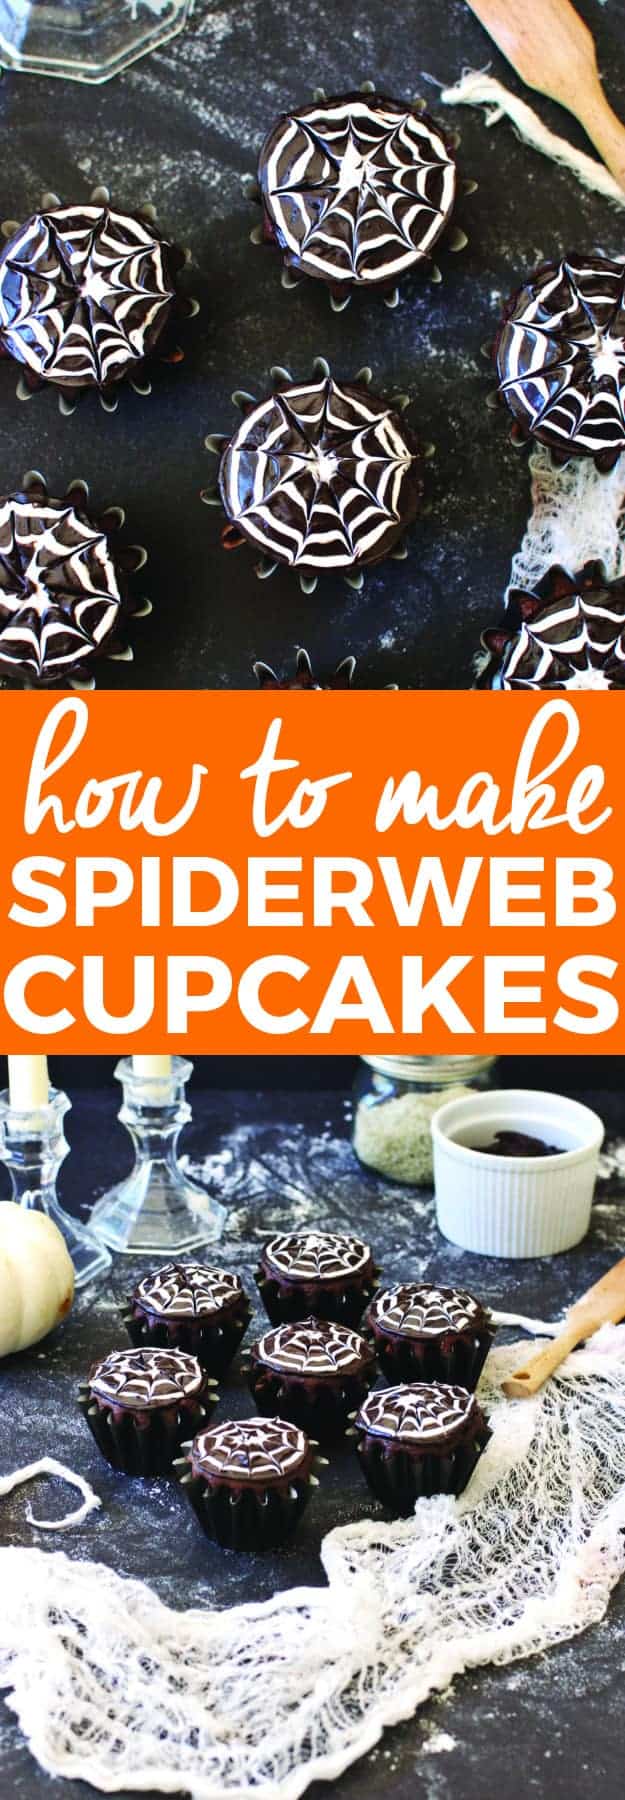 How to Make Spiderweb Cupcakes | The Butter Half